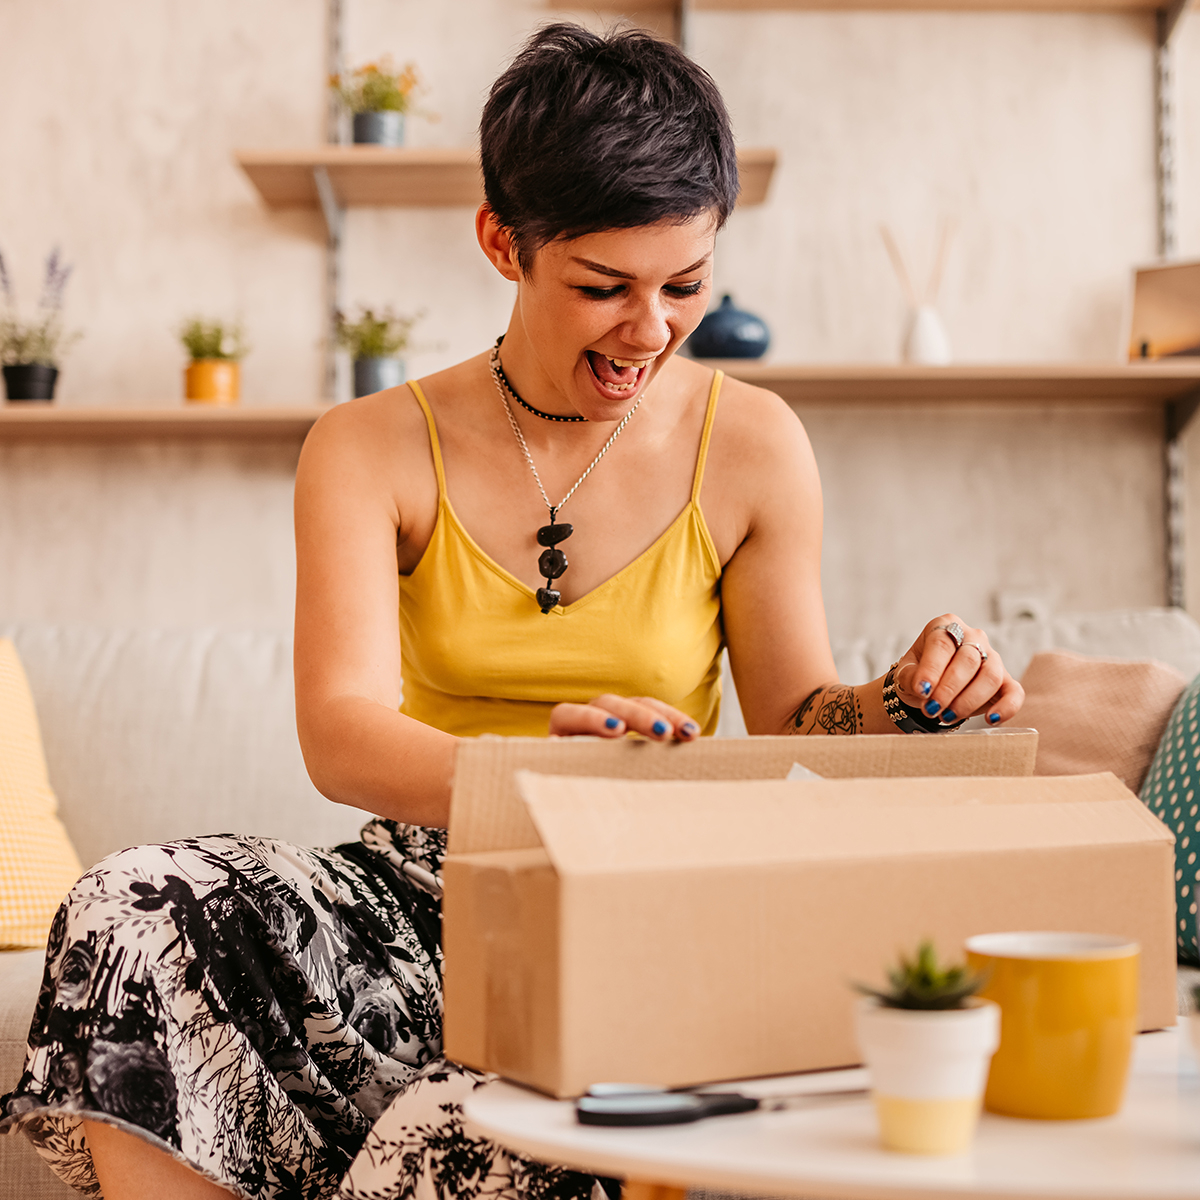 These 12 Sites With Fast Shipping Are Perfect for Last-Minute Shopping